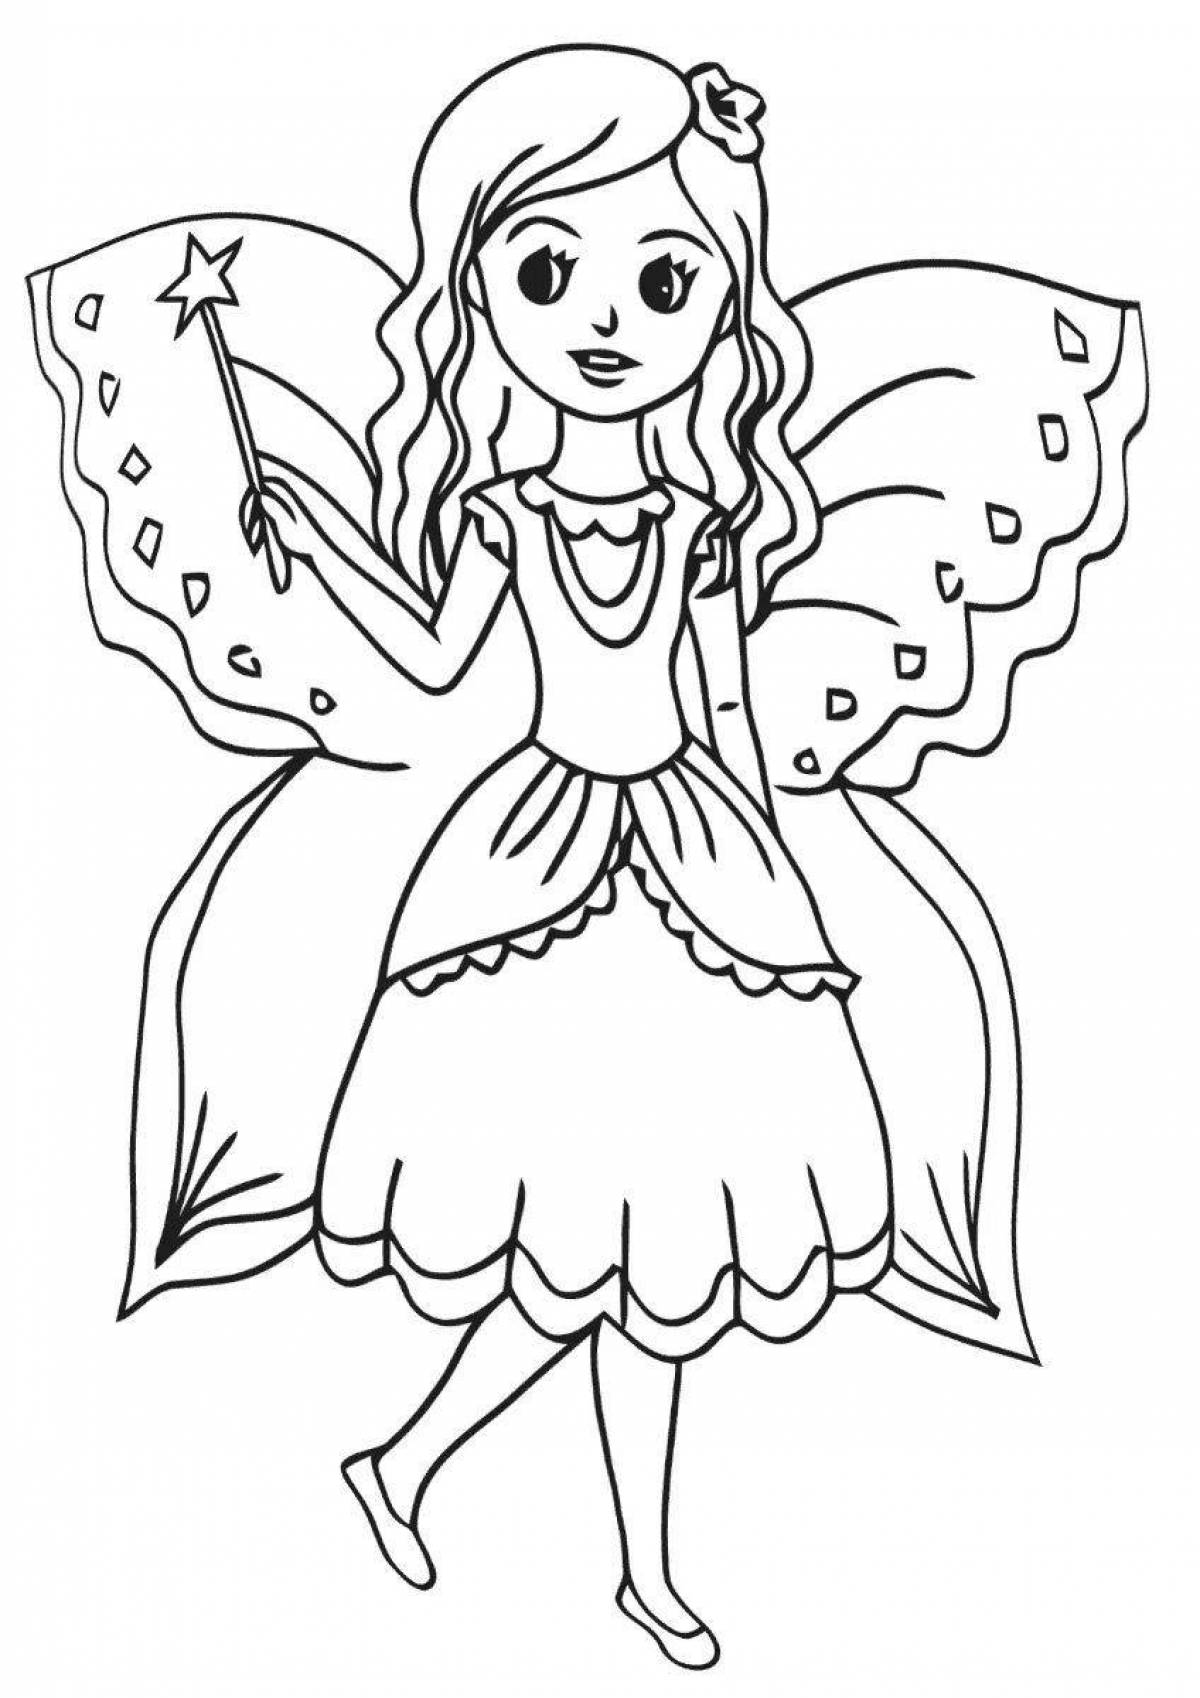 Exalted coloring page princesses all together